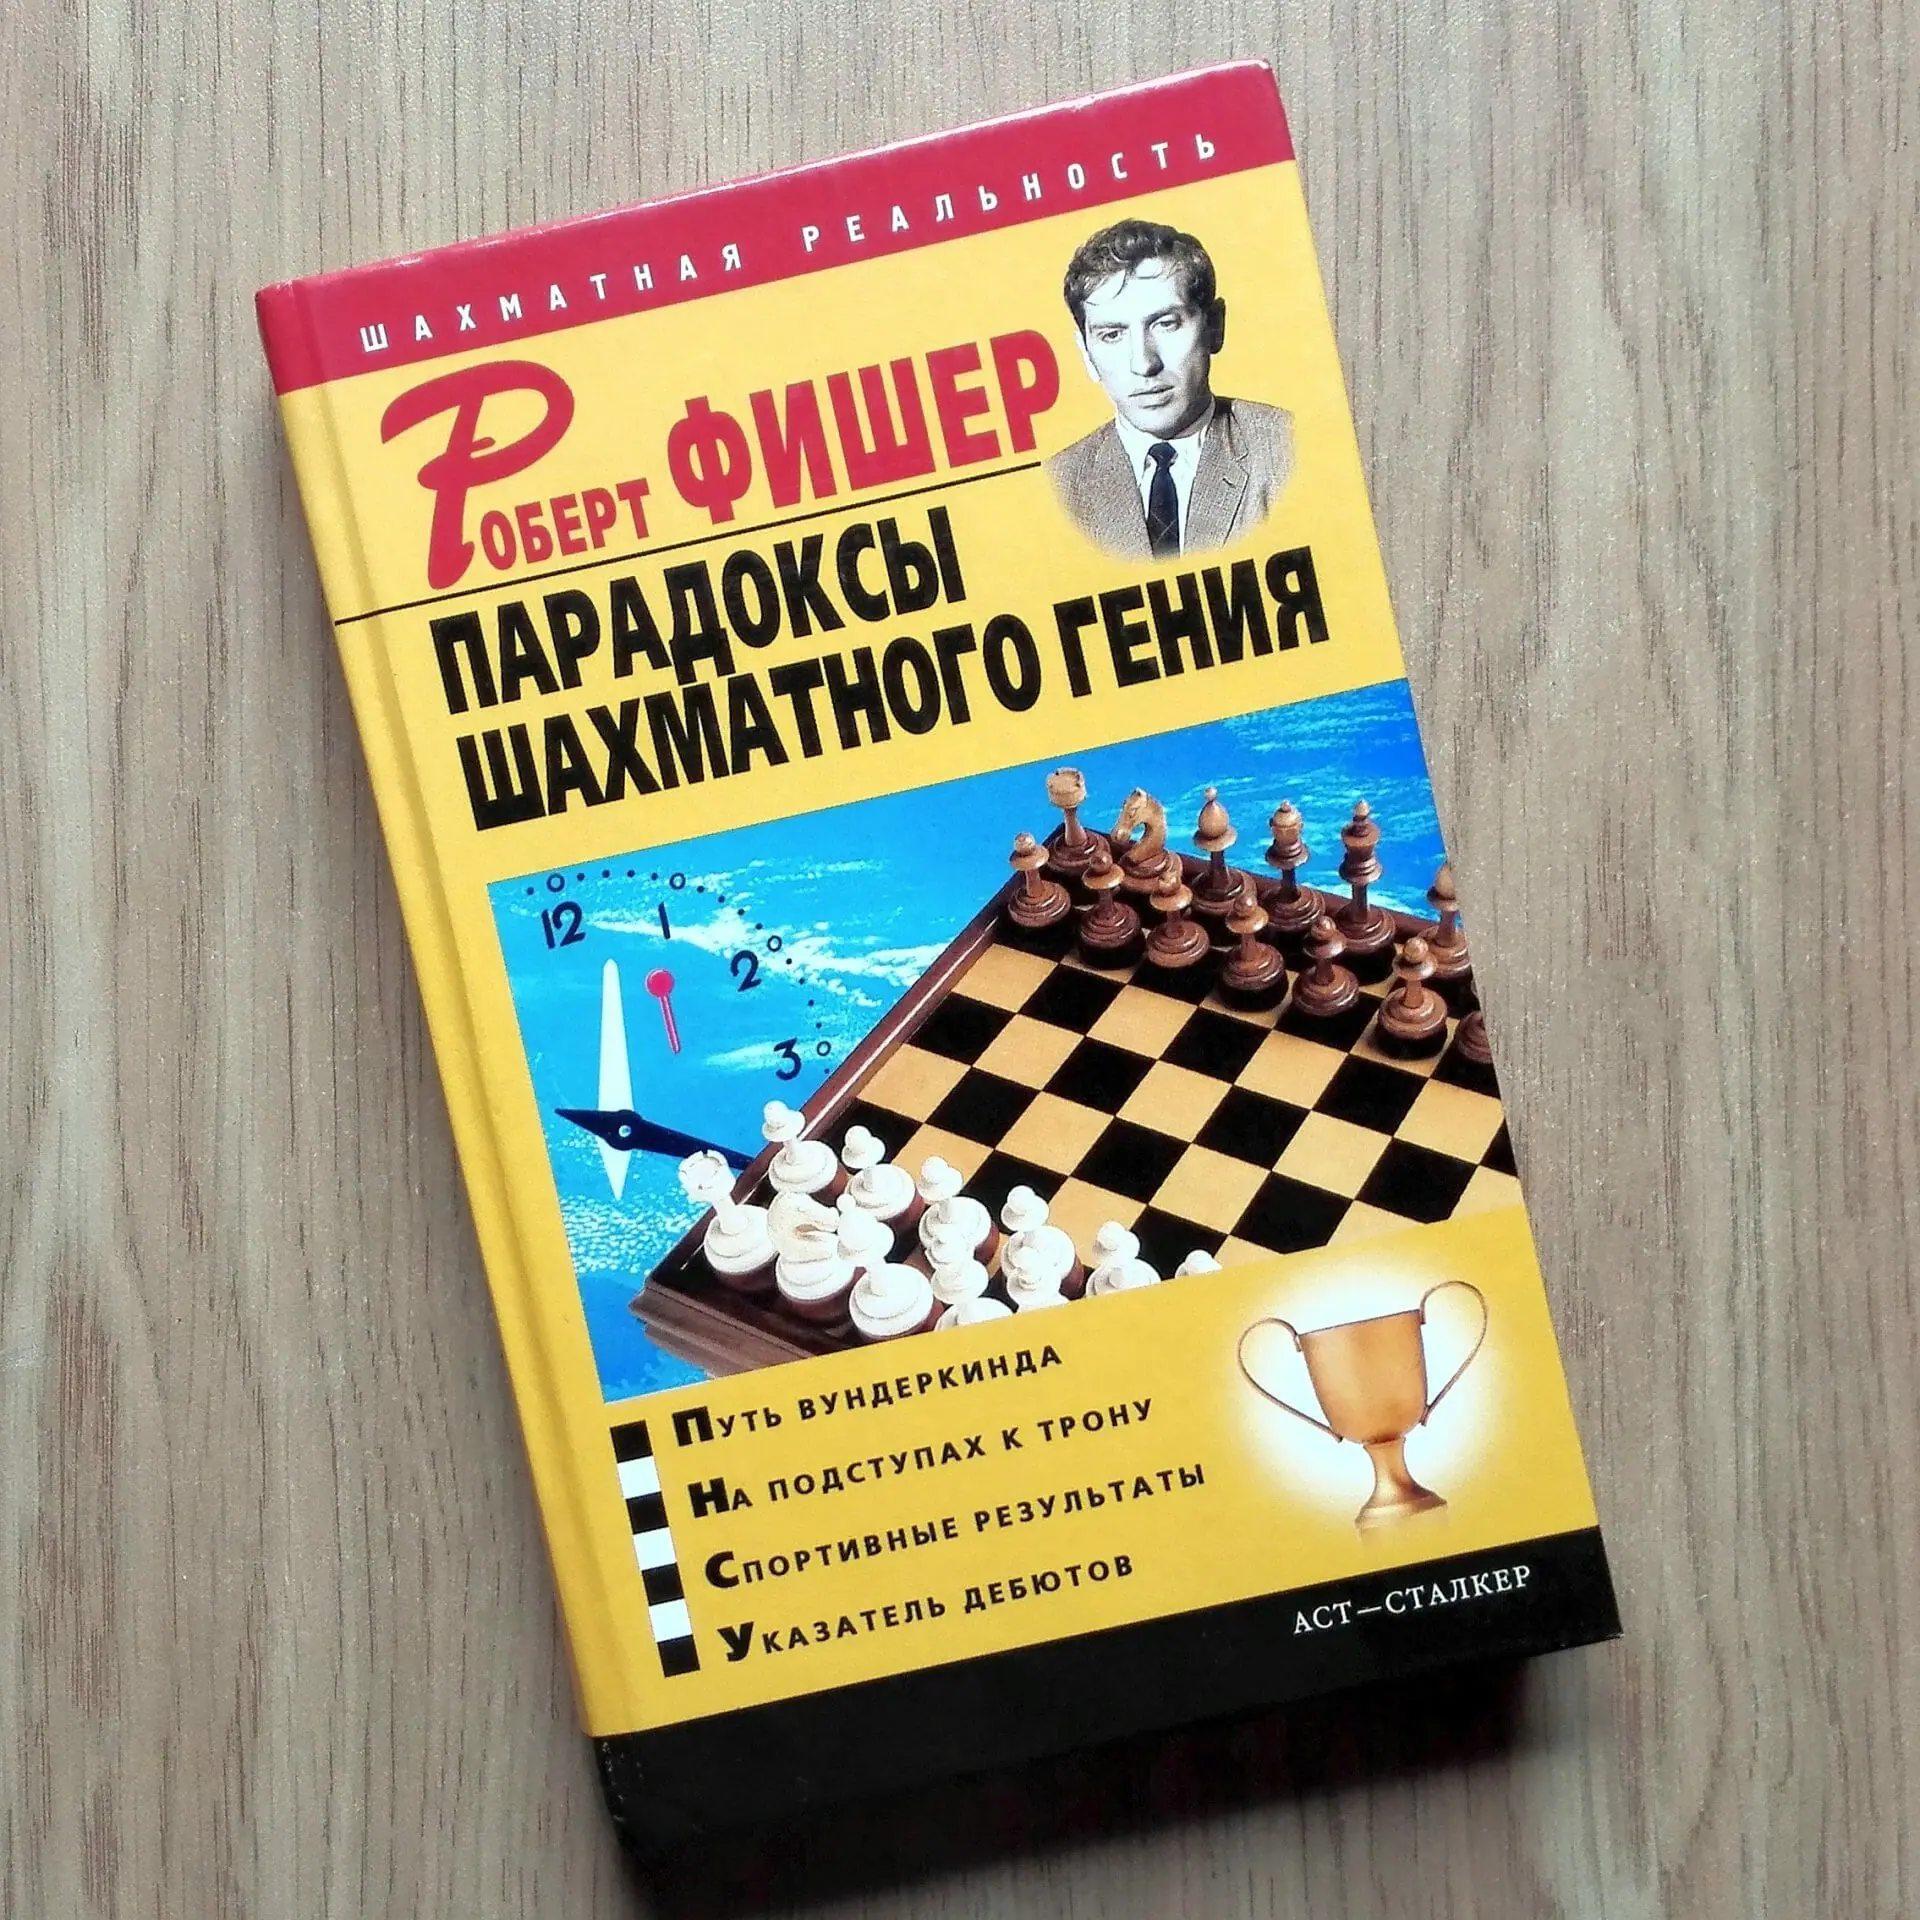 Bobby Fischer Biography of a Chess Player. Vintage Chess Book